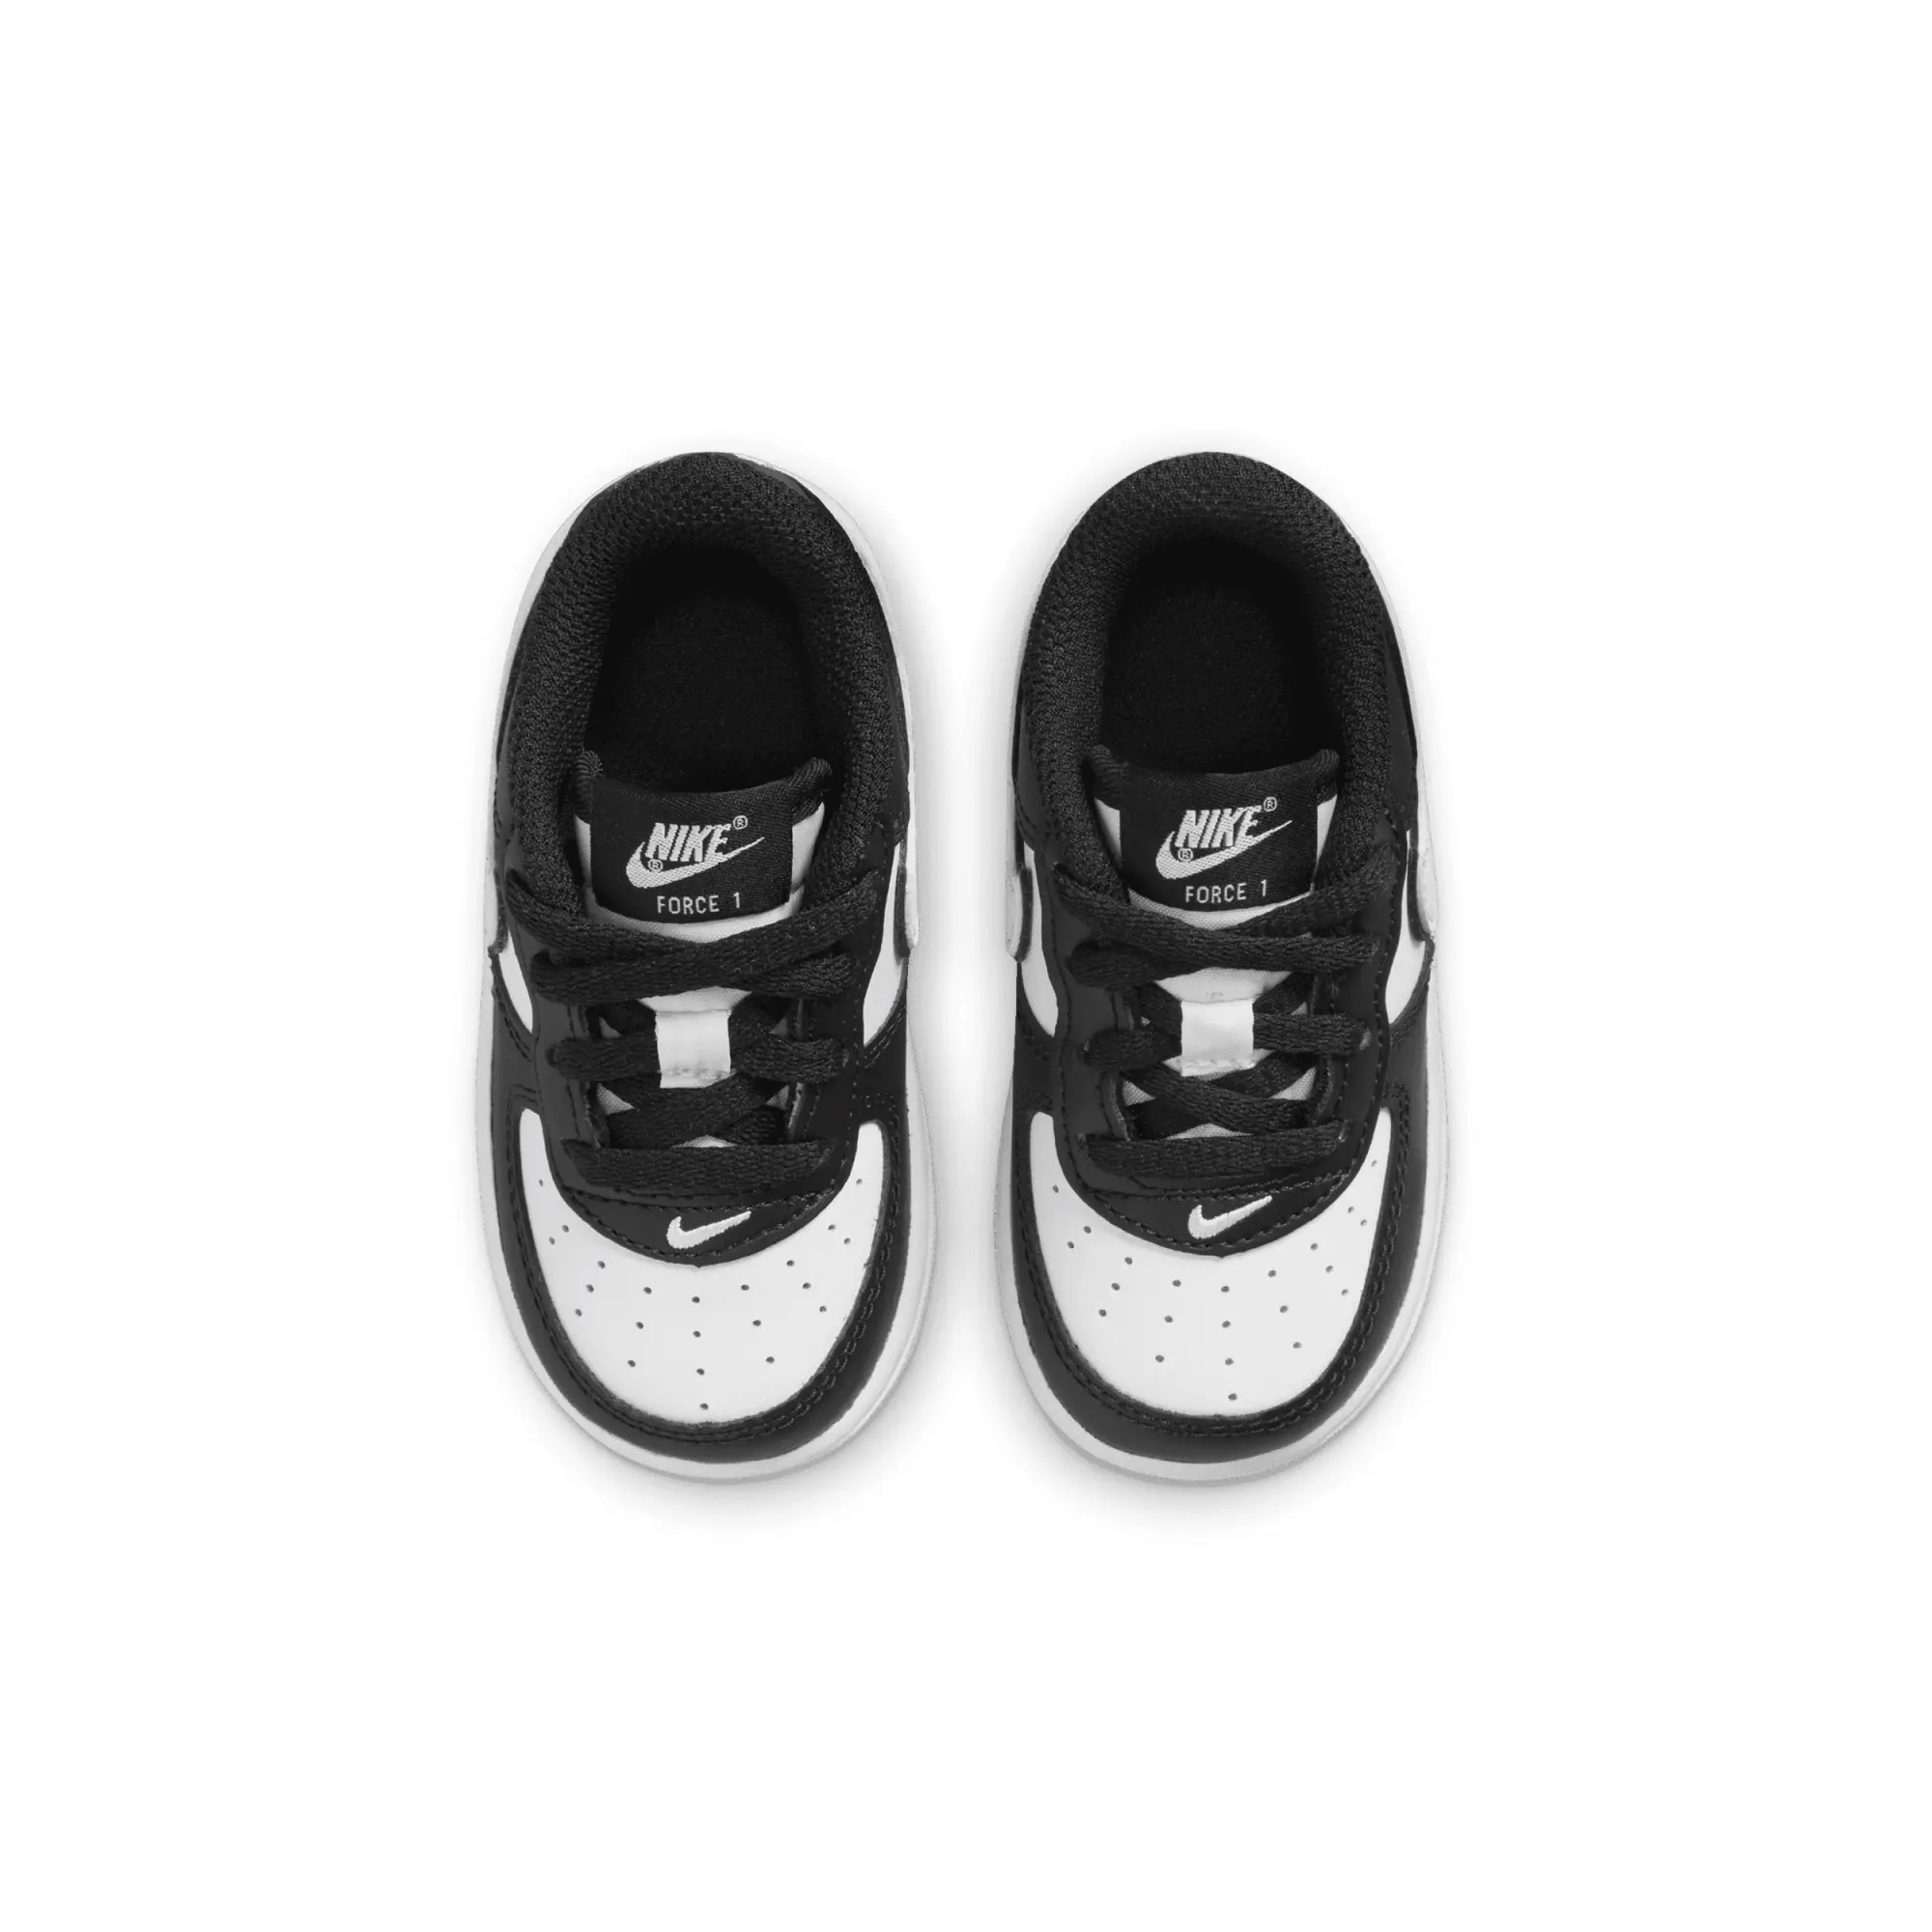 Nike white & black air force 1 lv8 2 Toddler Trainers